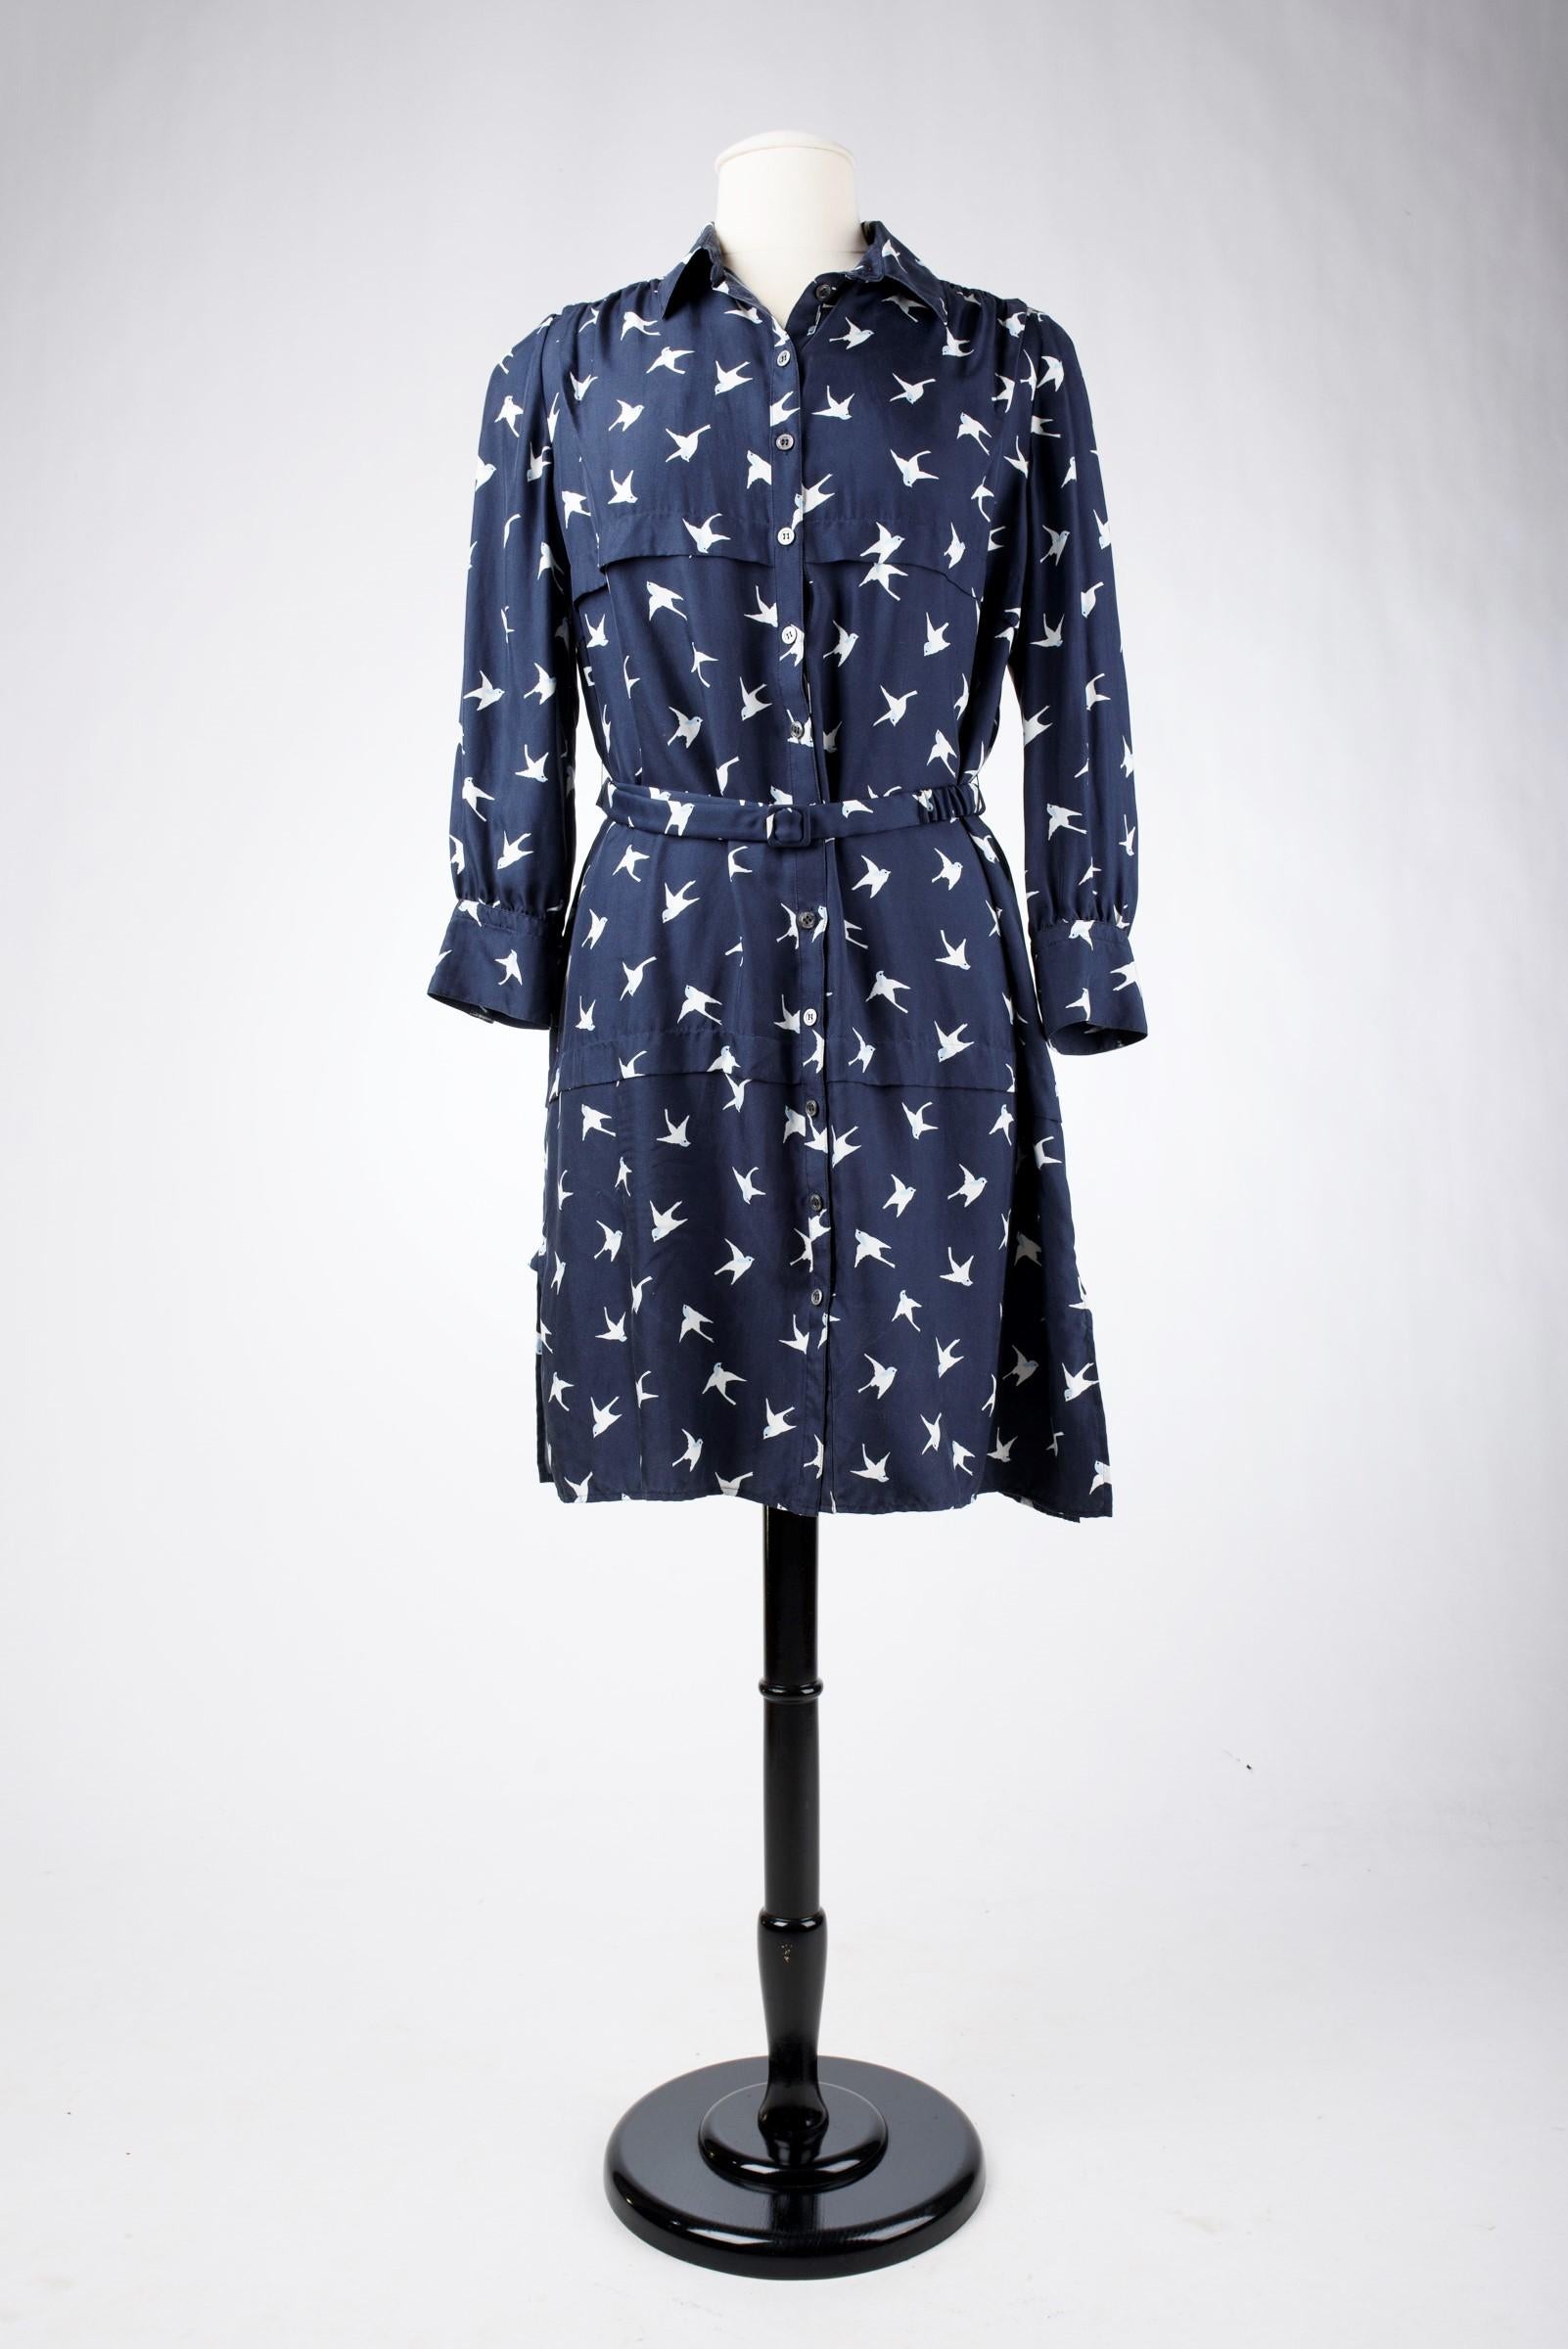 Black A Blouse dress in navy silk printed with swallows by Nina Ricci Circa 2000 For Sale